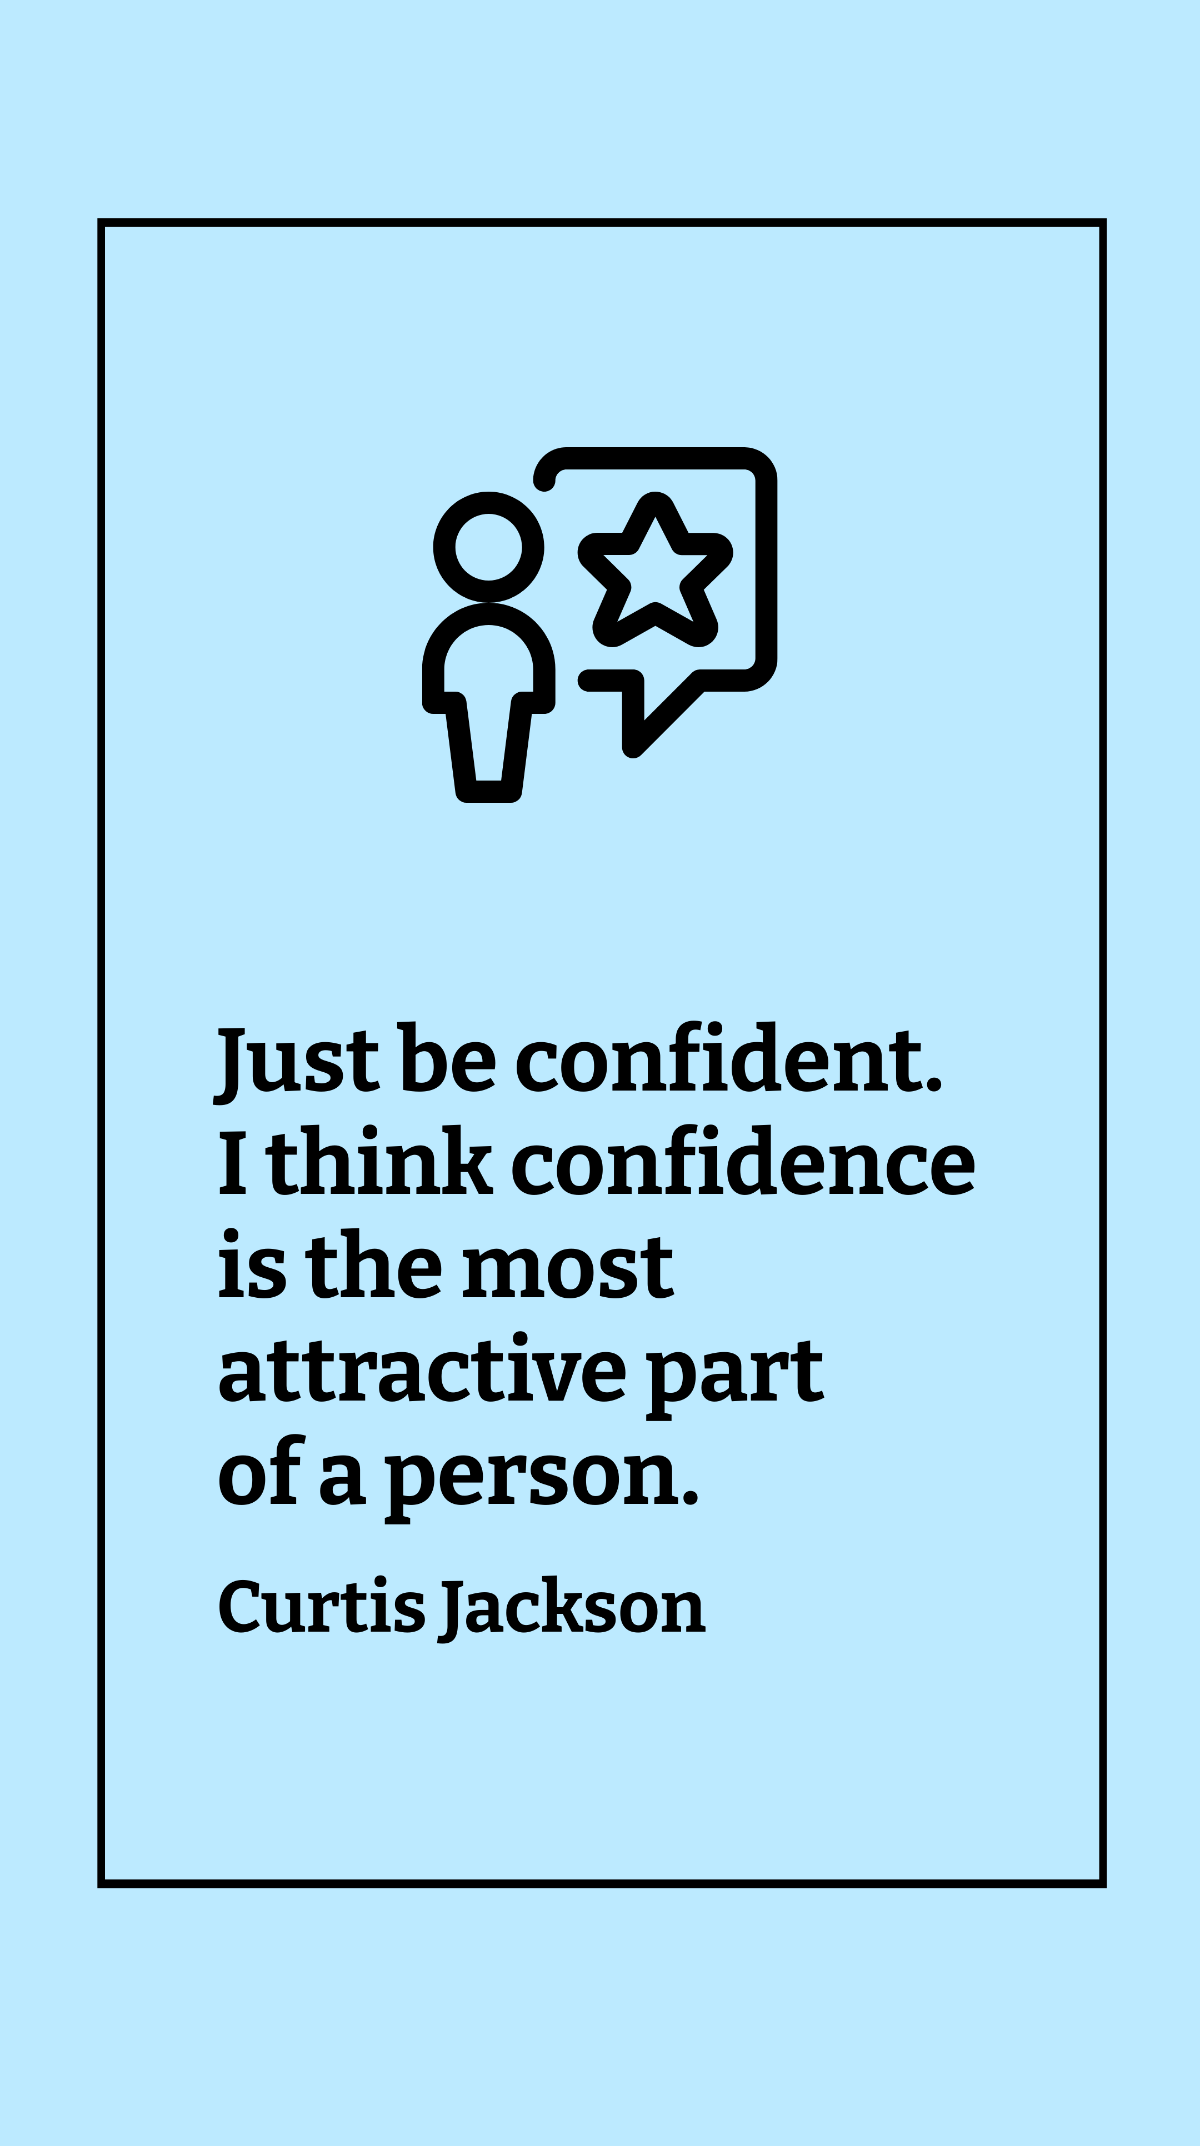 Curtis Jackson - Just be confident. I think confidence is the most attractive part of a person.